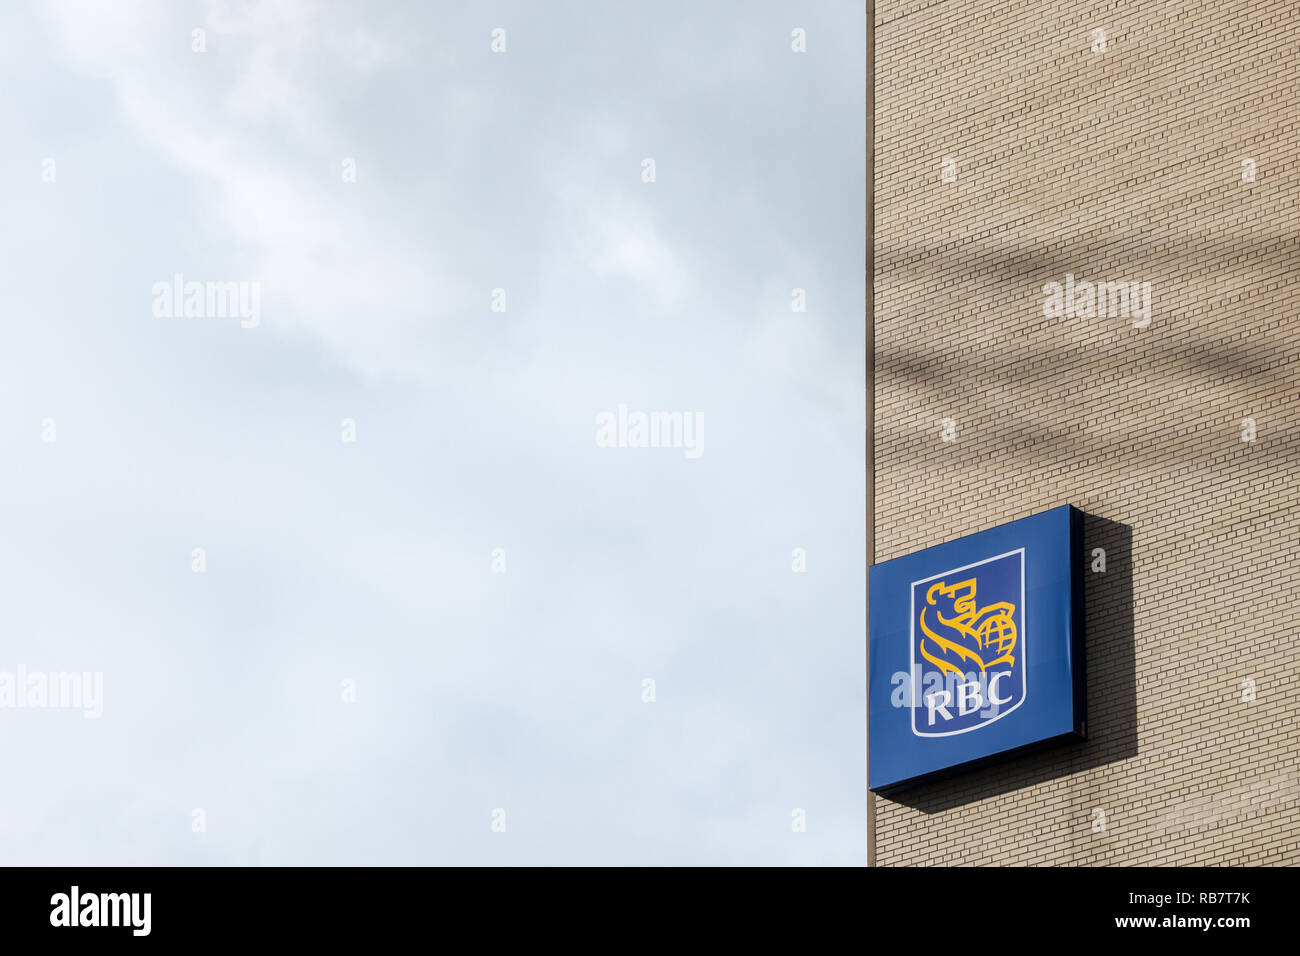 MONTREAL, CANADA - NOVEMBER 7, 2018: Logo of the Royal Bank of Canada (RBC) in Montreal, Quebec near their main office. RBC is one of the main banks o Stock Photo